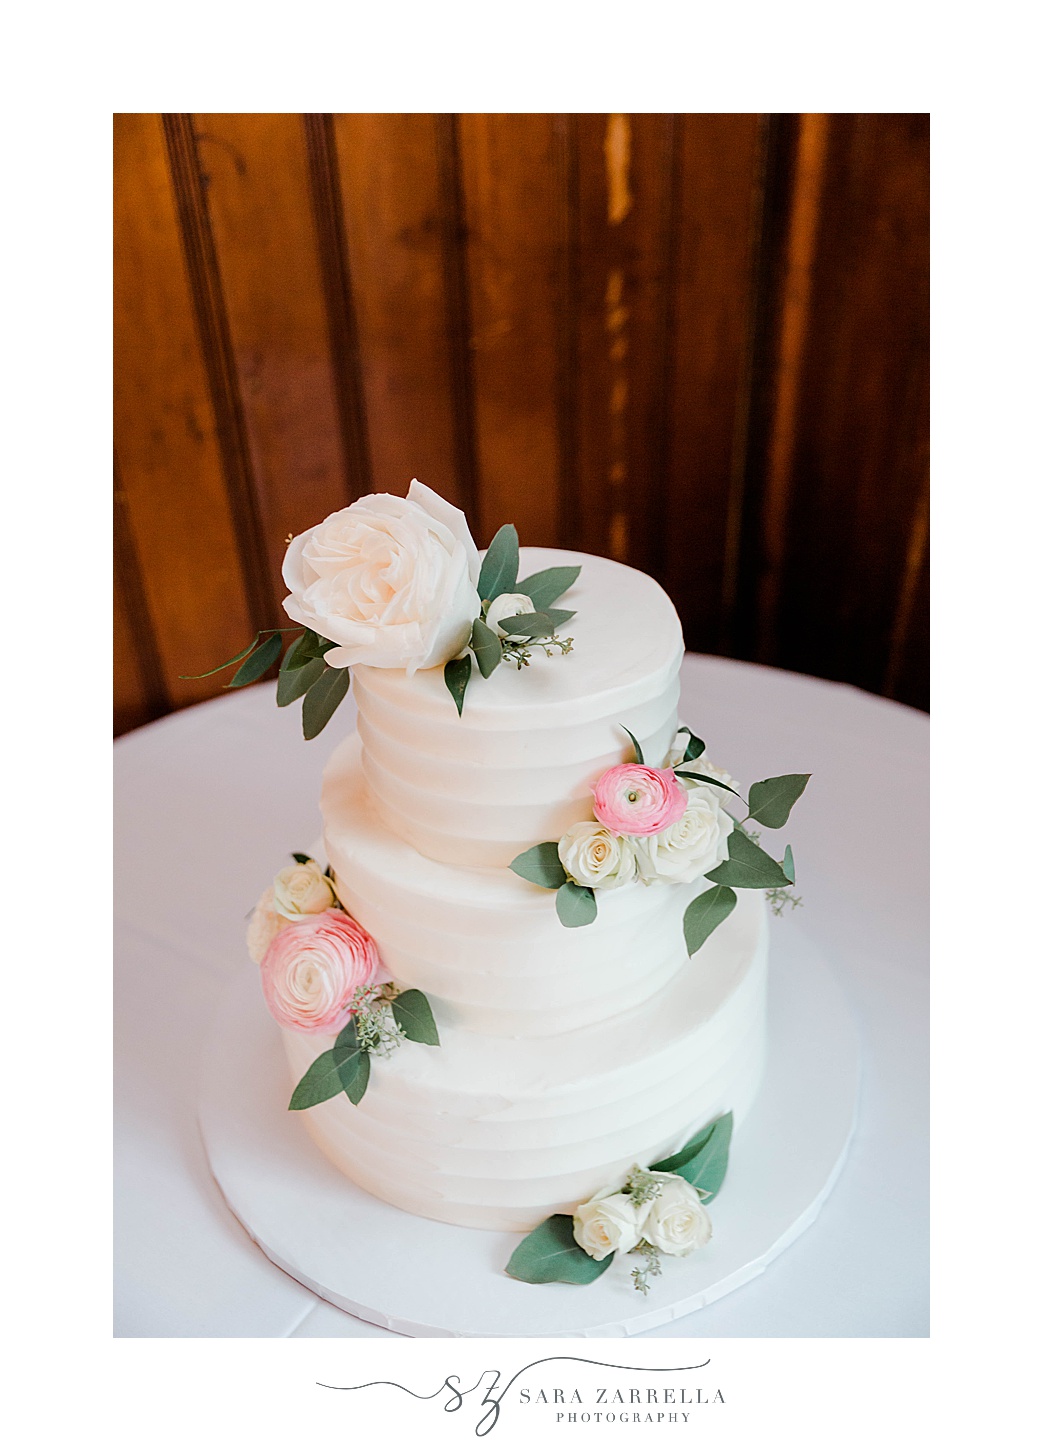 tiered wedding cake with pink flowers